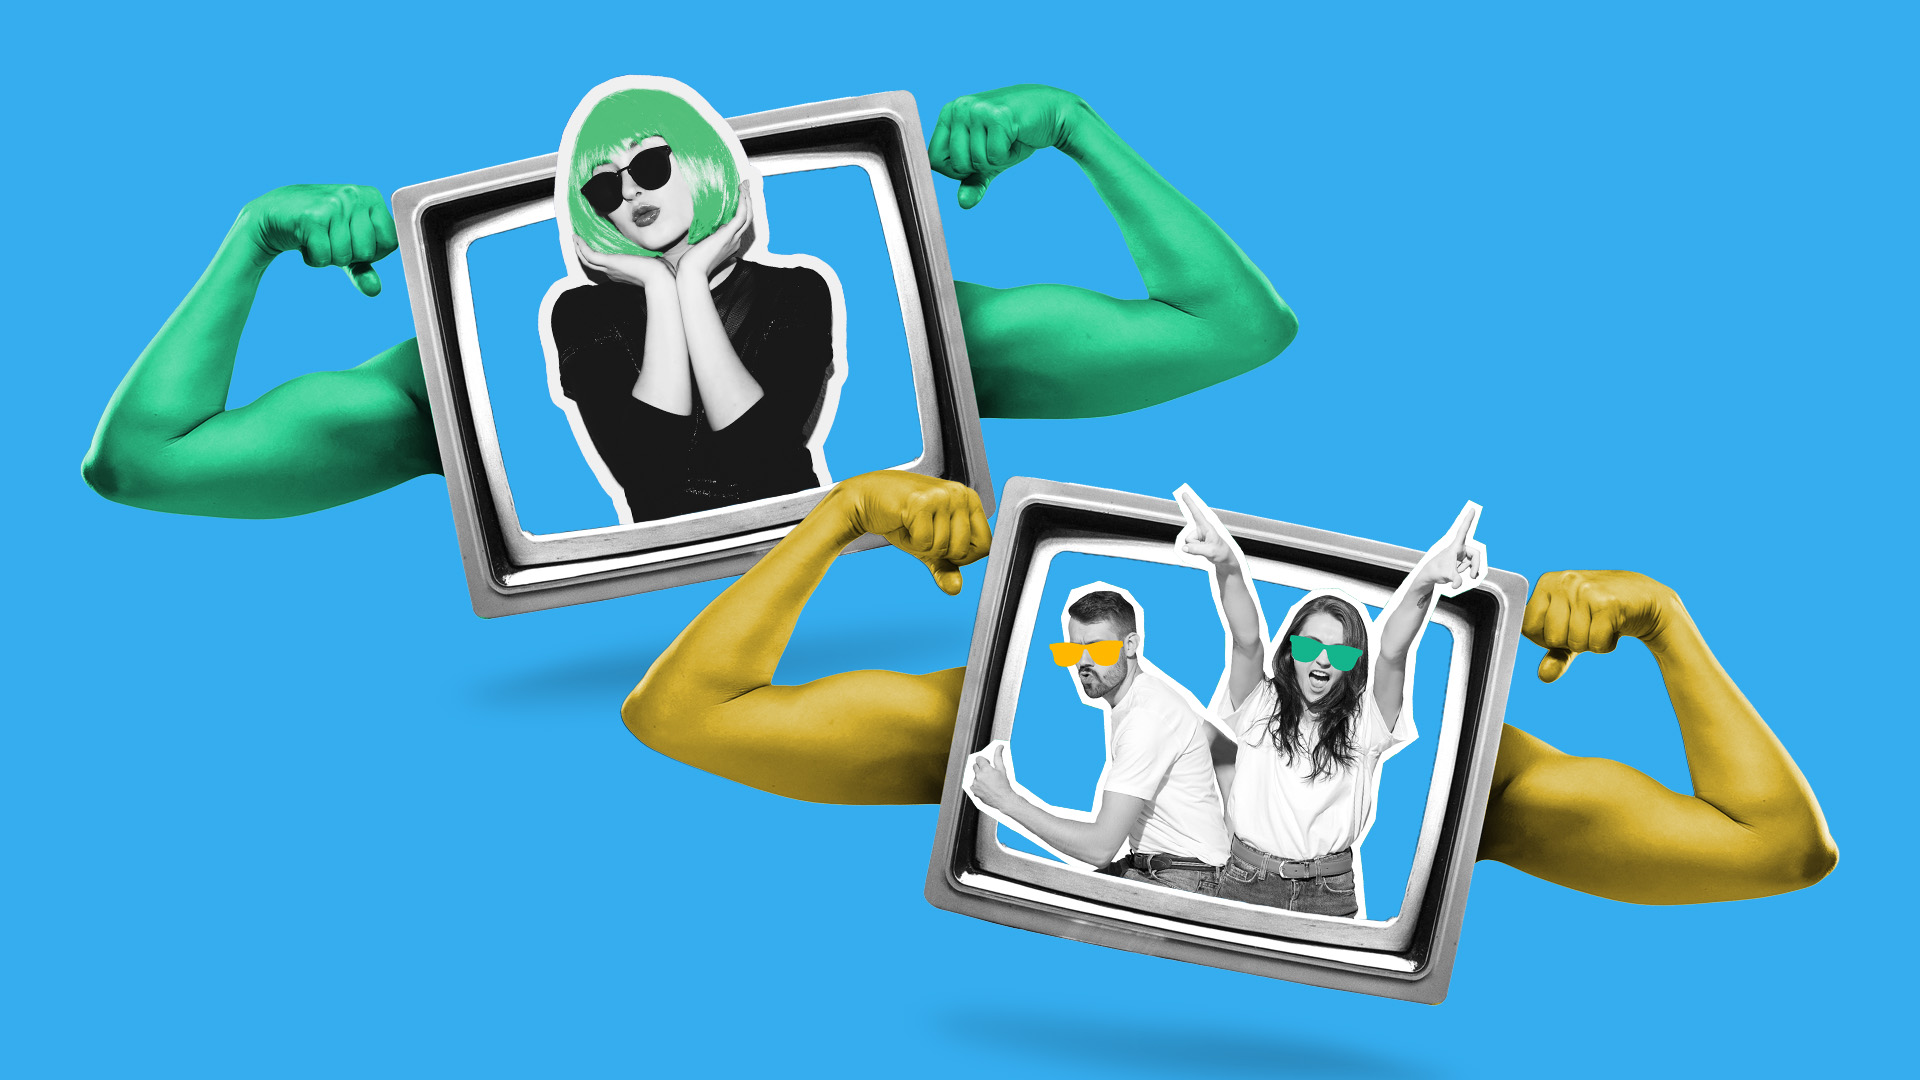 This image is of two TV screens with people in each of them. On the outside of the TV screen, there are human arms flexing, to represent the strength of digital video advertising. Overall, this image represents the best QuickFrame videos for the month.